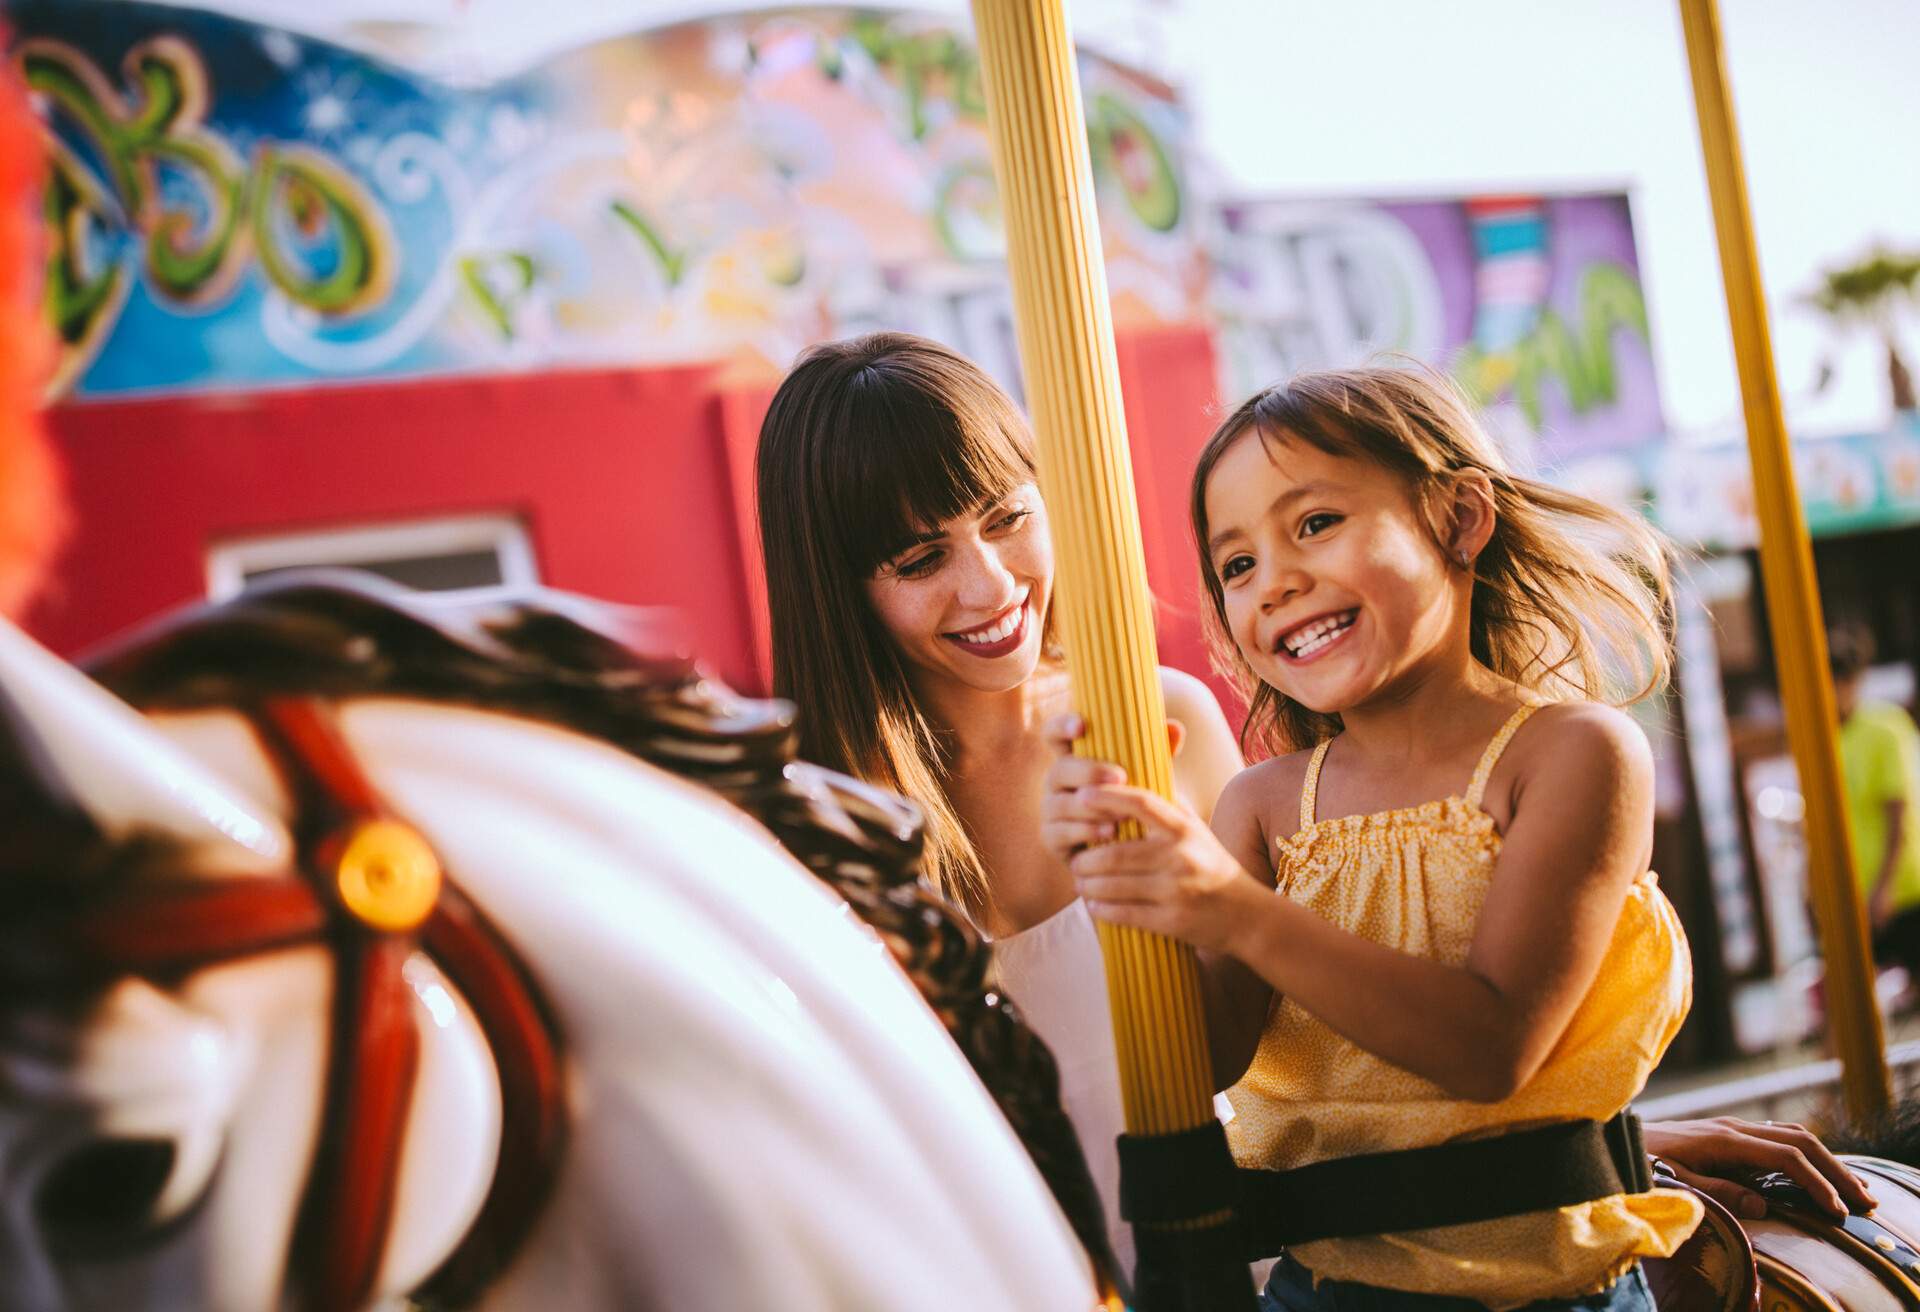 THEME_PEOPLE_FAMILY_CHILDREN_CAROUSEL_AMUSEMENT-PARK-GettyImages-950279234